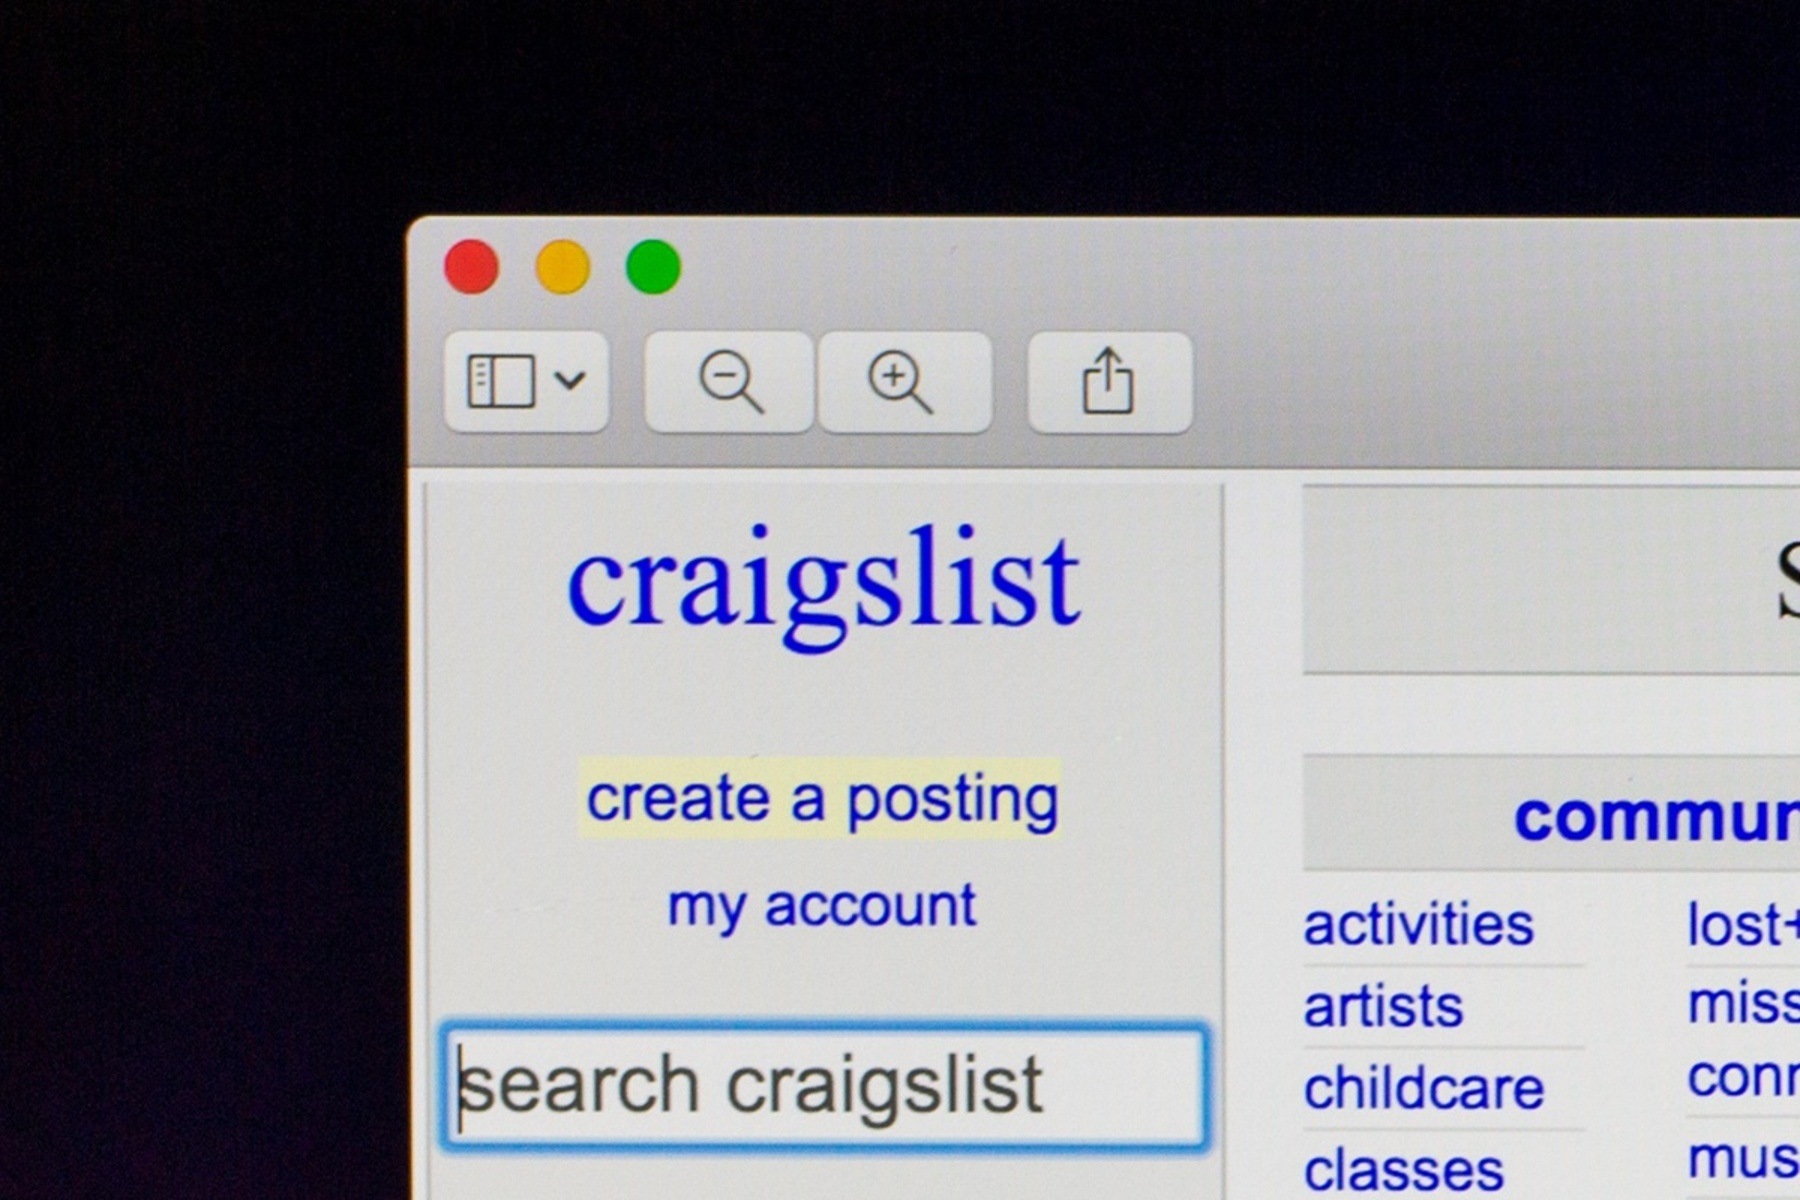 How To Buy And Sell Safely On Craigslist